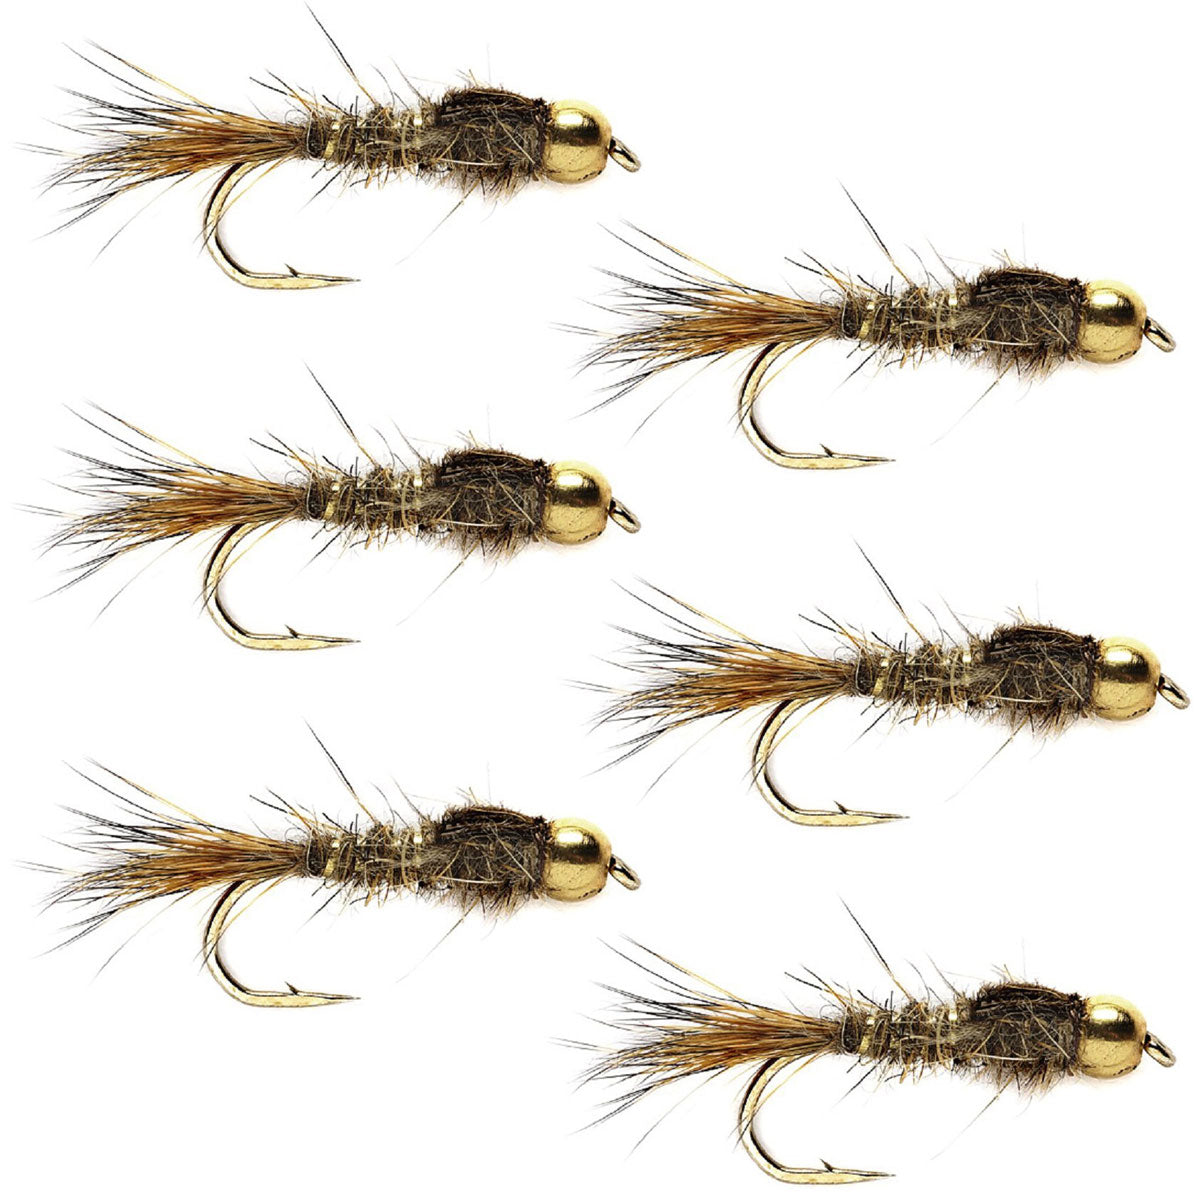 Tungsten Bead Head Gold Ribbed Hare's Ear Trout Fly - Nymph Wet Fly - 6 Flies Hook Size 10